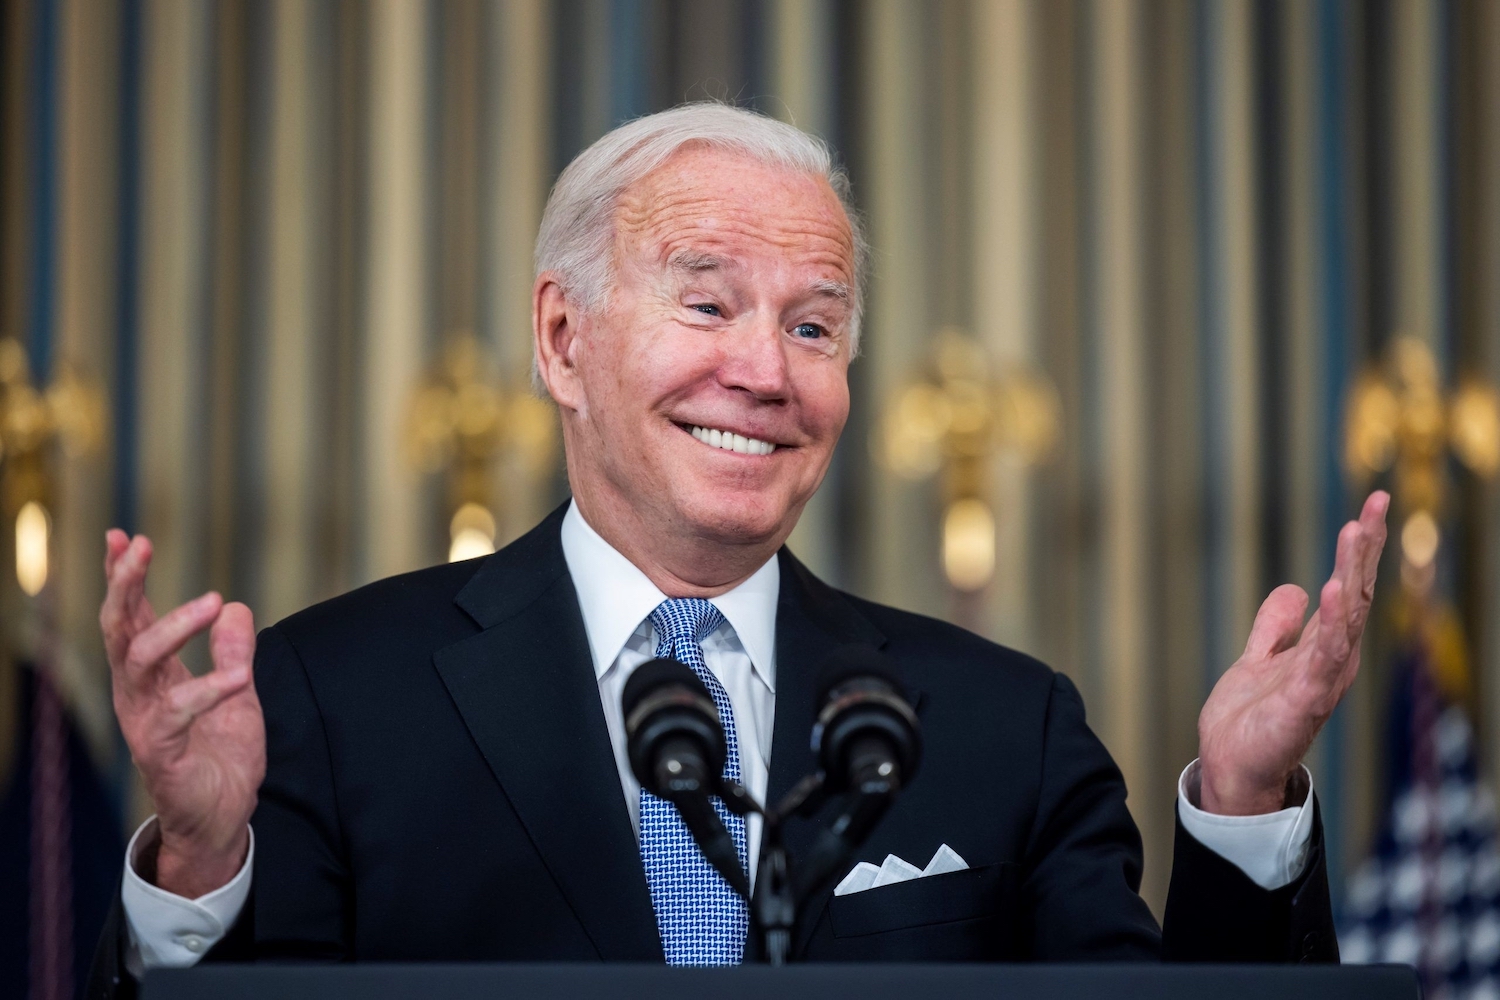 Featured image for “The Dog That Didn’t Bark: Three Words Biden Would Not, Could Not Say In NY Crime Speech”